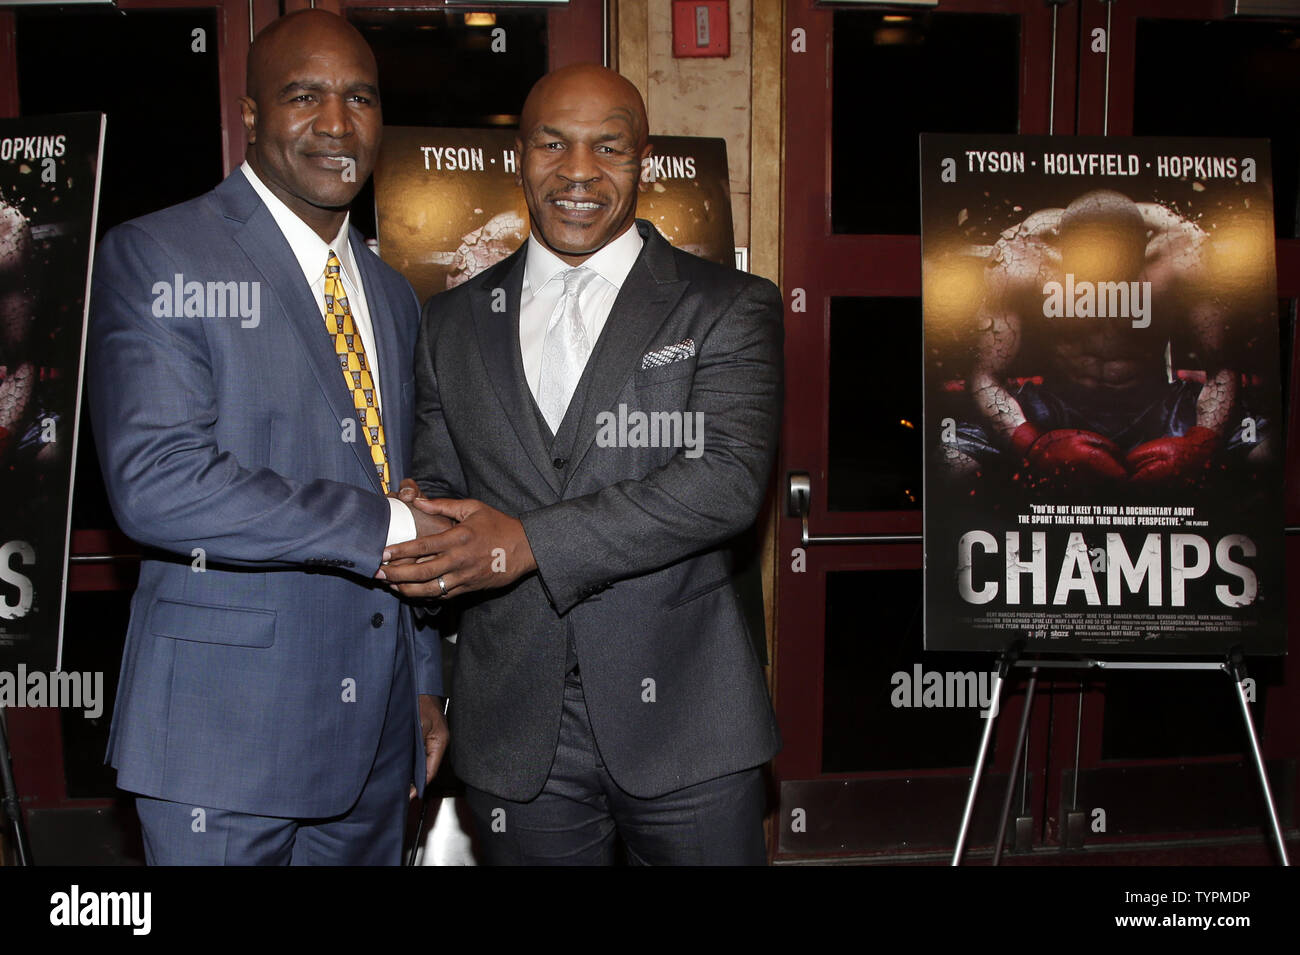 https://c8.alamy.com/comp/TYPMDP/mike-tyson-and-evander-holyfield-arrive-on-the-red-carpet-at-the-special-screening-of-champs-at-village-east-cinema-in-new-york-city-on-march-12-2015-champs-is-a-documentary-that-contains-classic-fight-footage-and-candid-interviews-with-mark-wahlberg-denzel-washington-ron-howard-spike-lee-mary-j-blige-and-50-cent-photo-by-john-angelilloupi-TYPMDP.jpg